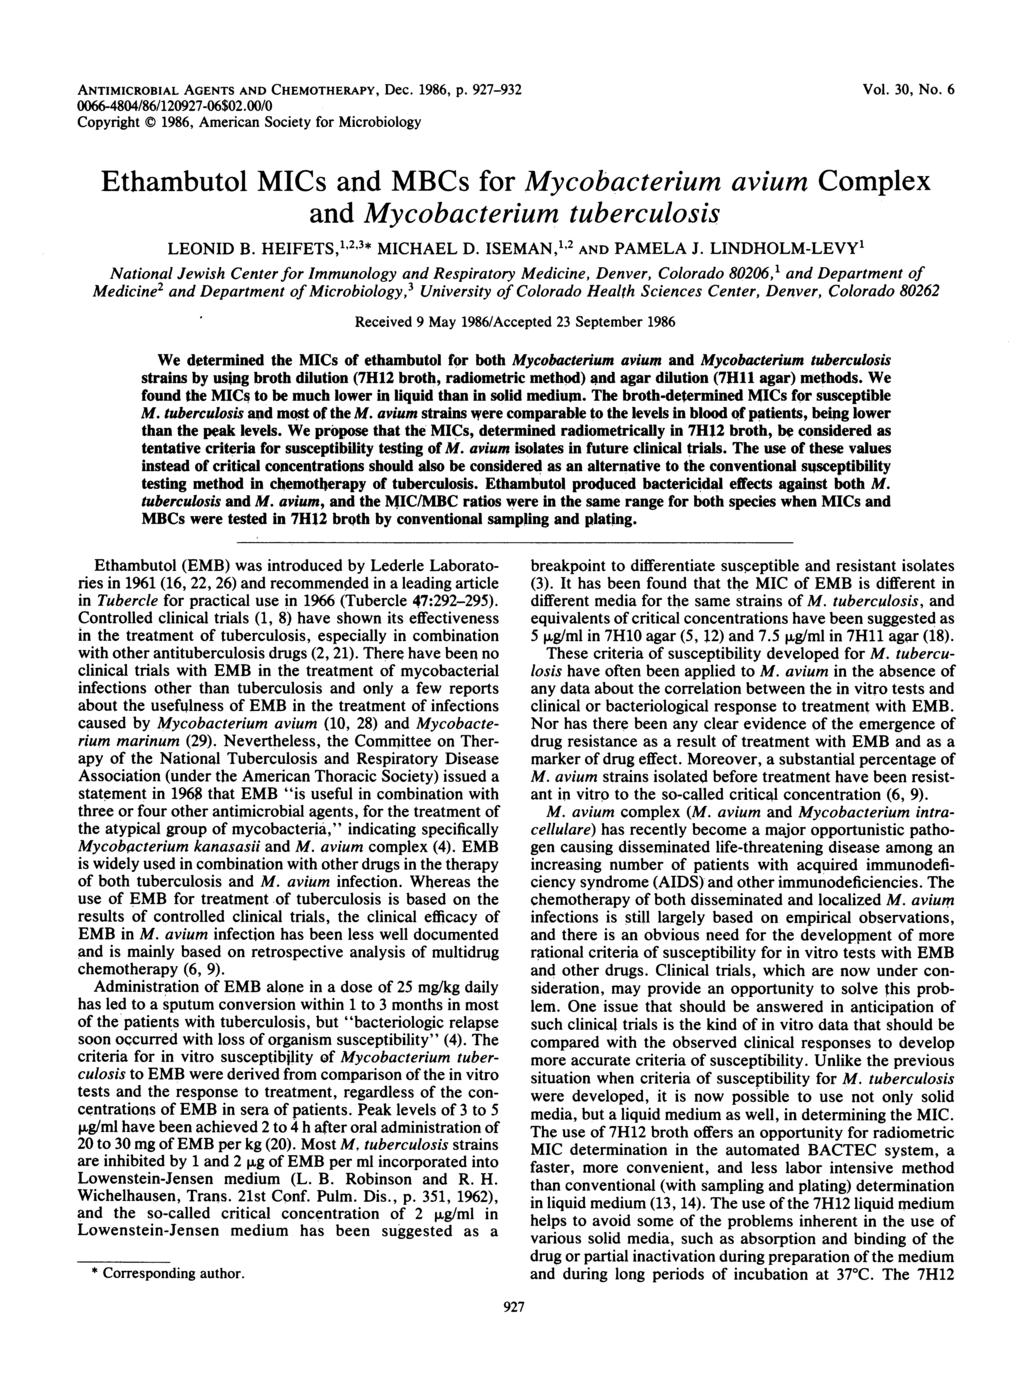 ANTIMICROBIAL AGENTS AND CHEMOTHERAPY, Dec. 1986, p. 927-932 66-484/86/12927-6$2./ Copyright 1986, American Society for Microbiology Vol. 3, No.